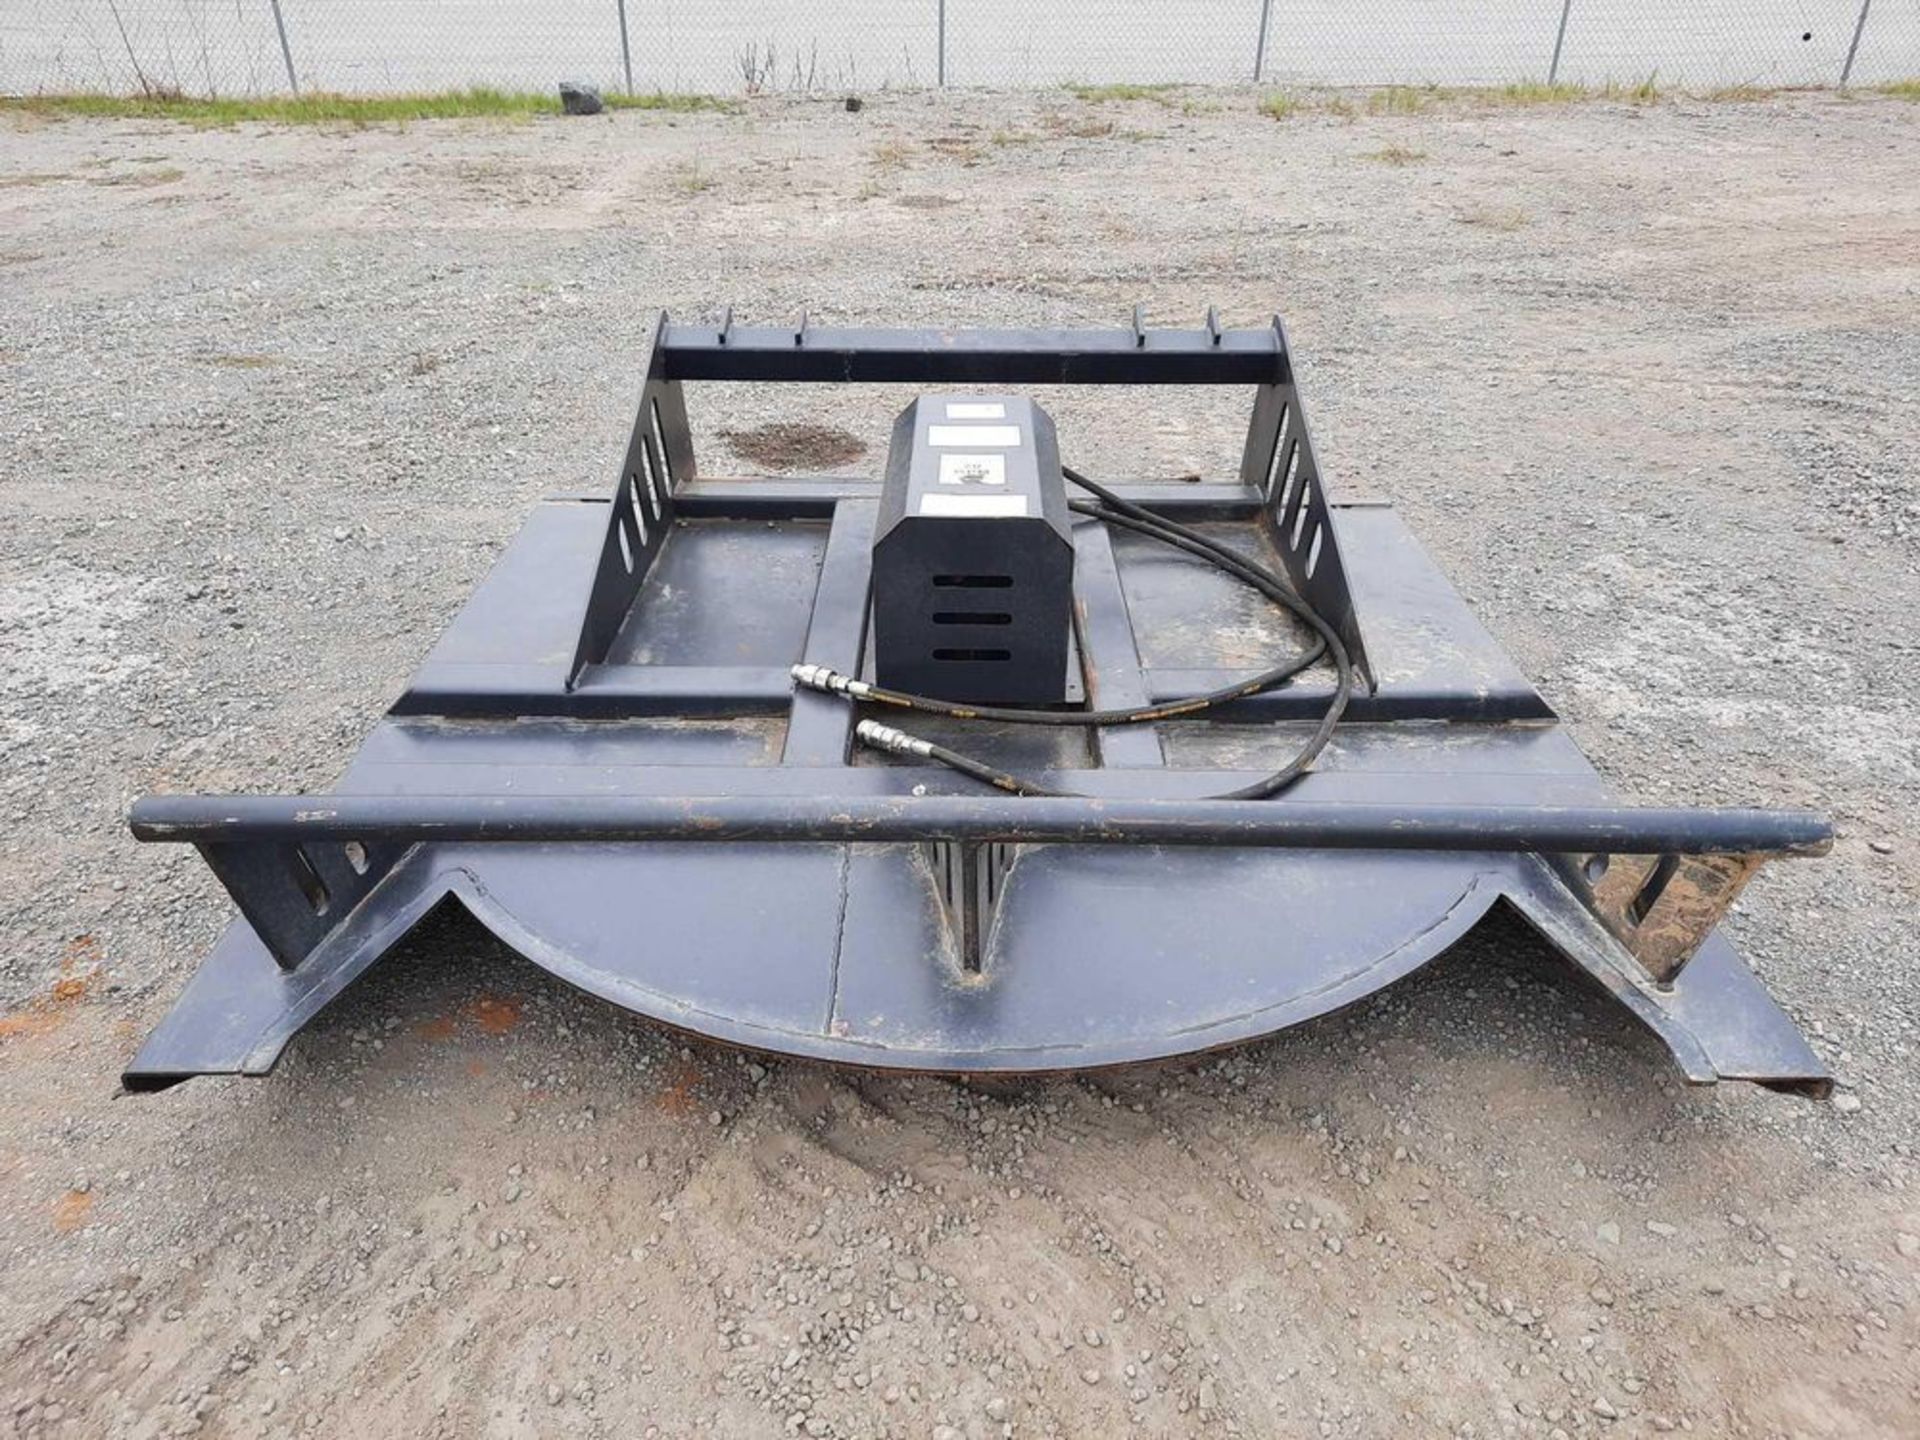 72" JCT HYDRAULIC ROTARY CUTTER ATTACHMENT FOR SKID STEER - Image 3 of 4